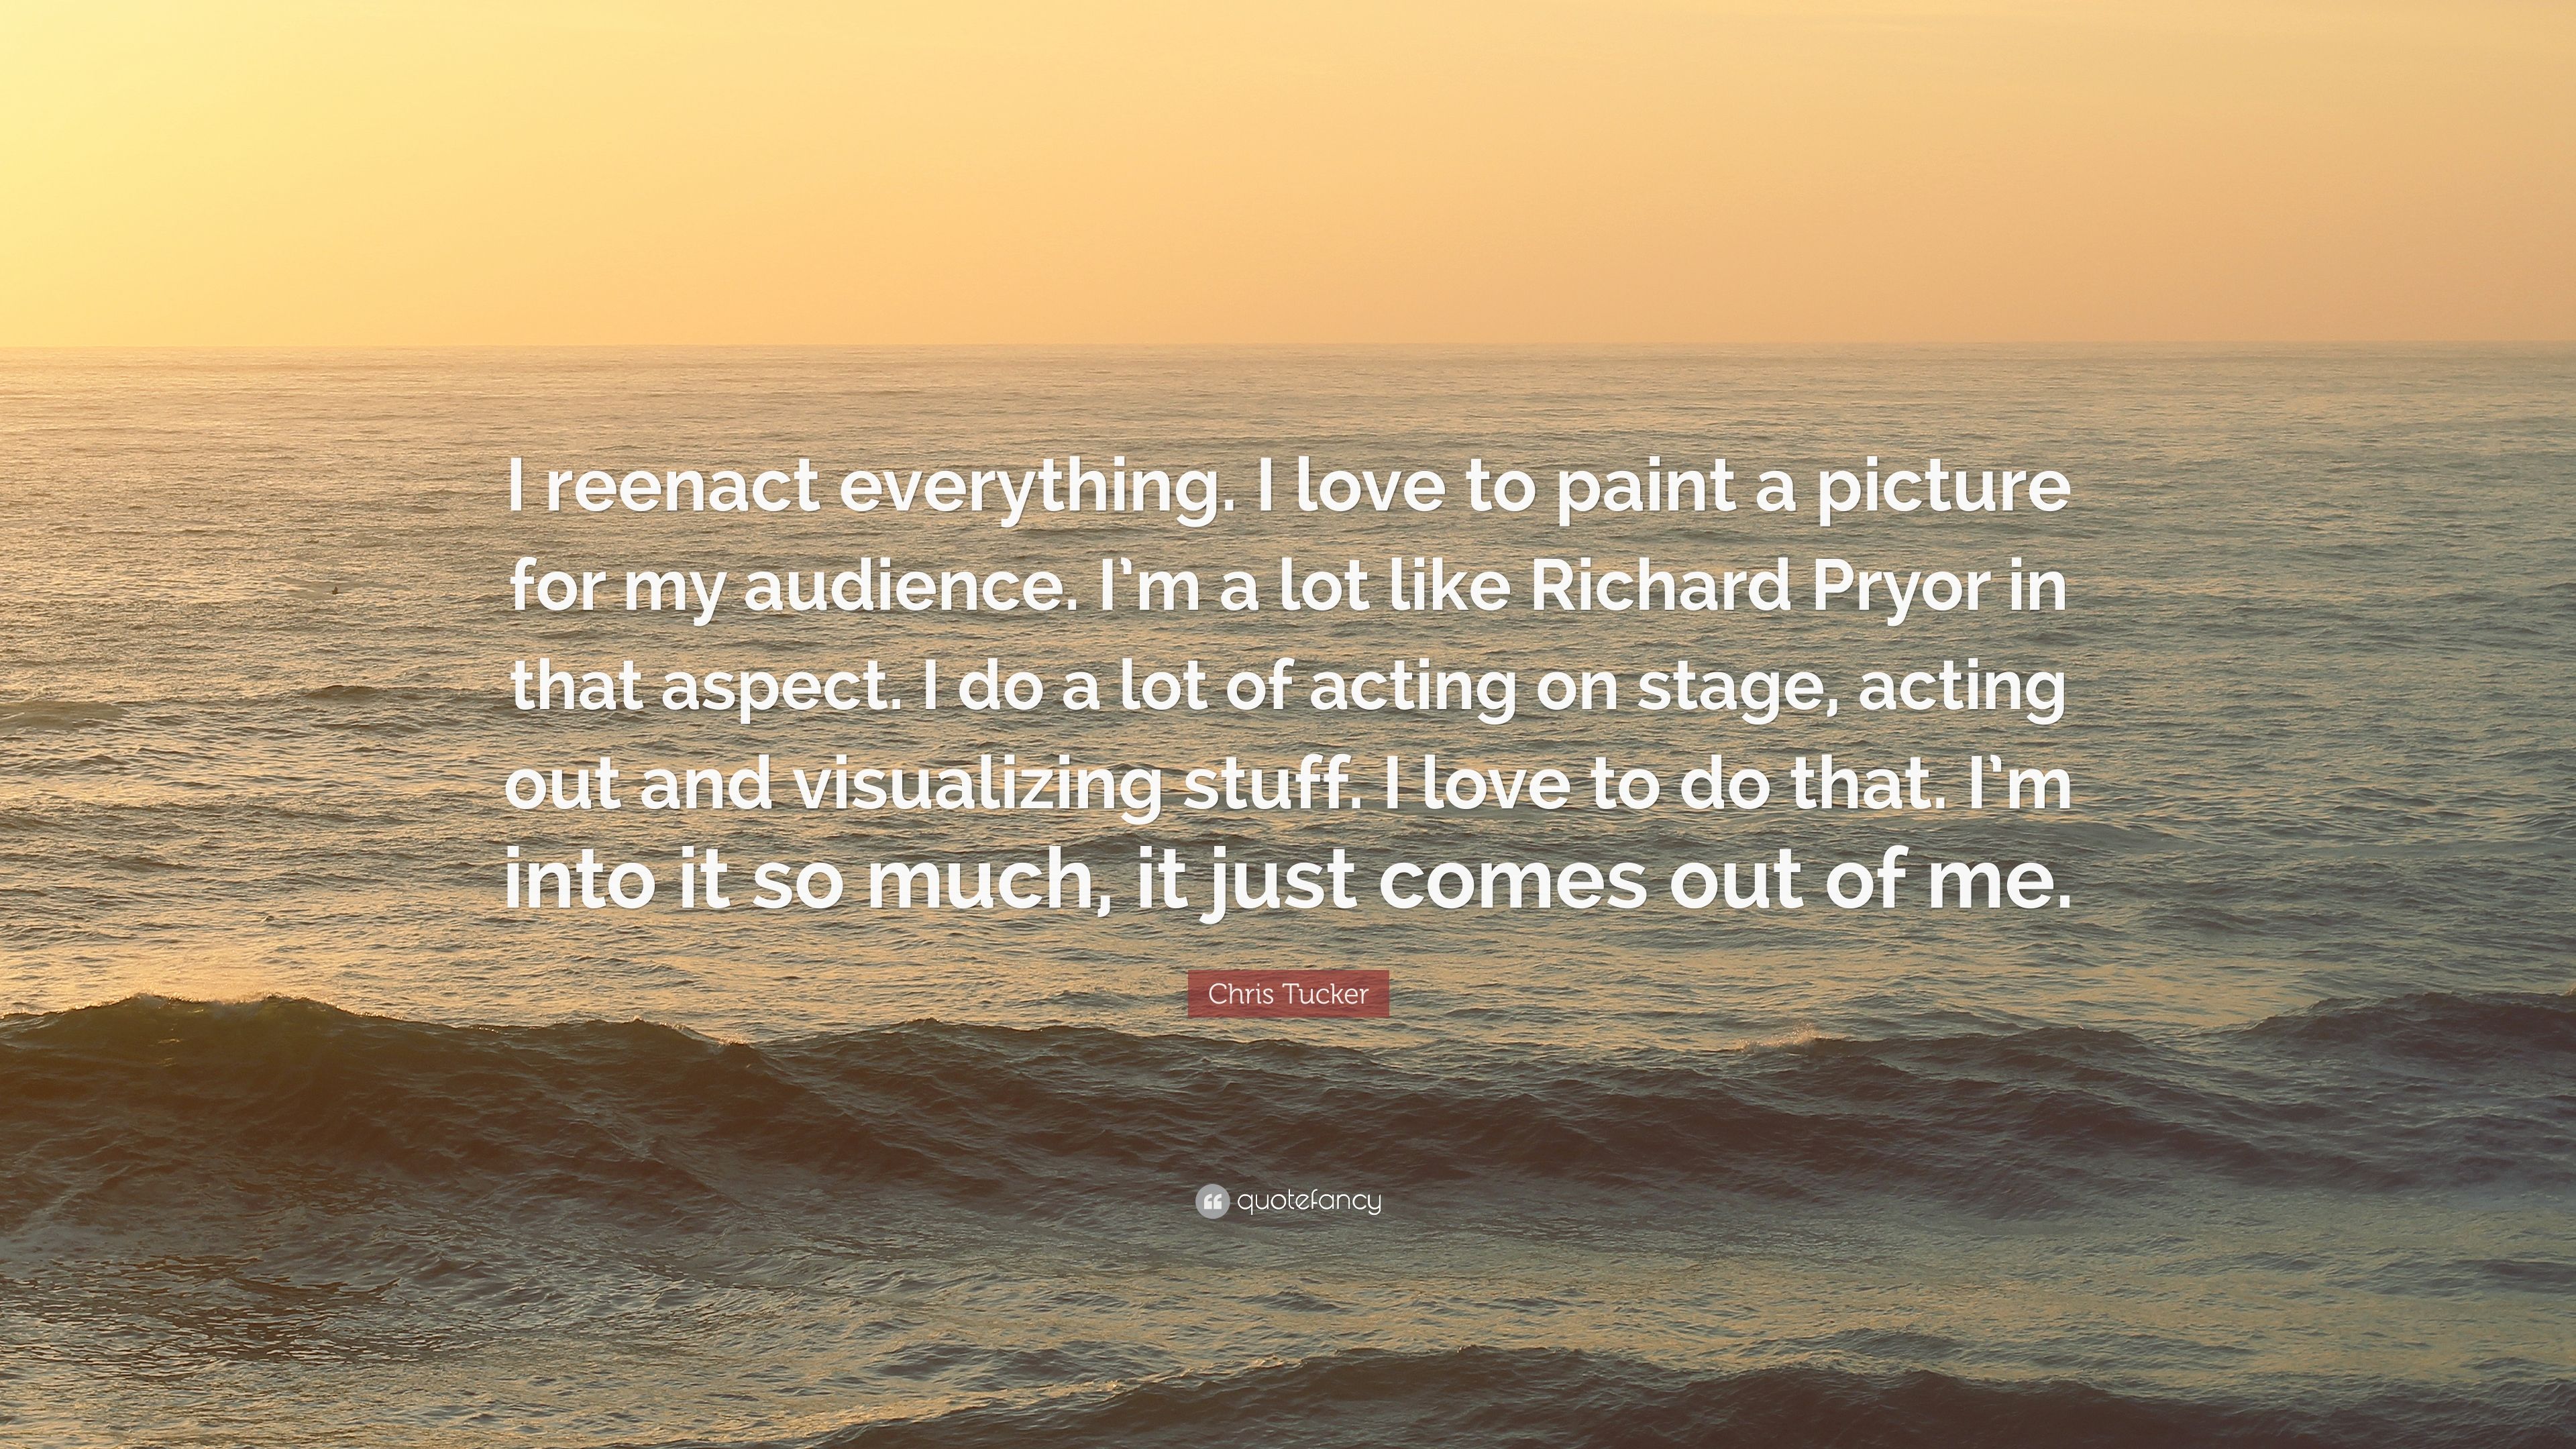 Chris Tucker Quote: “I reenact everything. I love to paint a